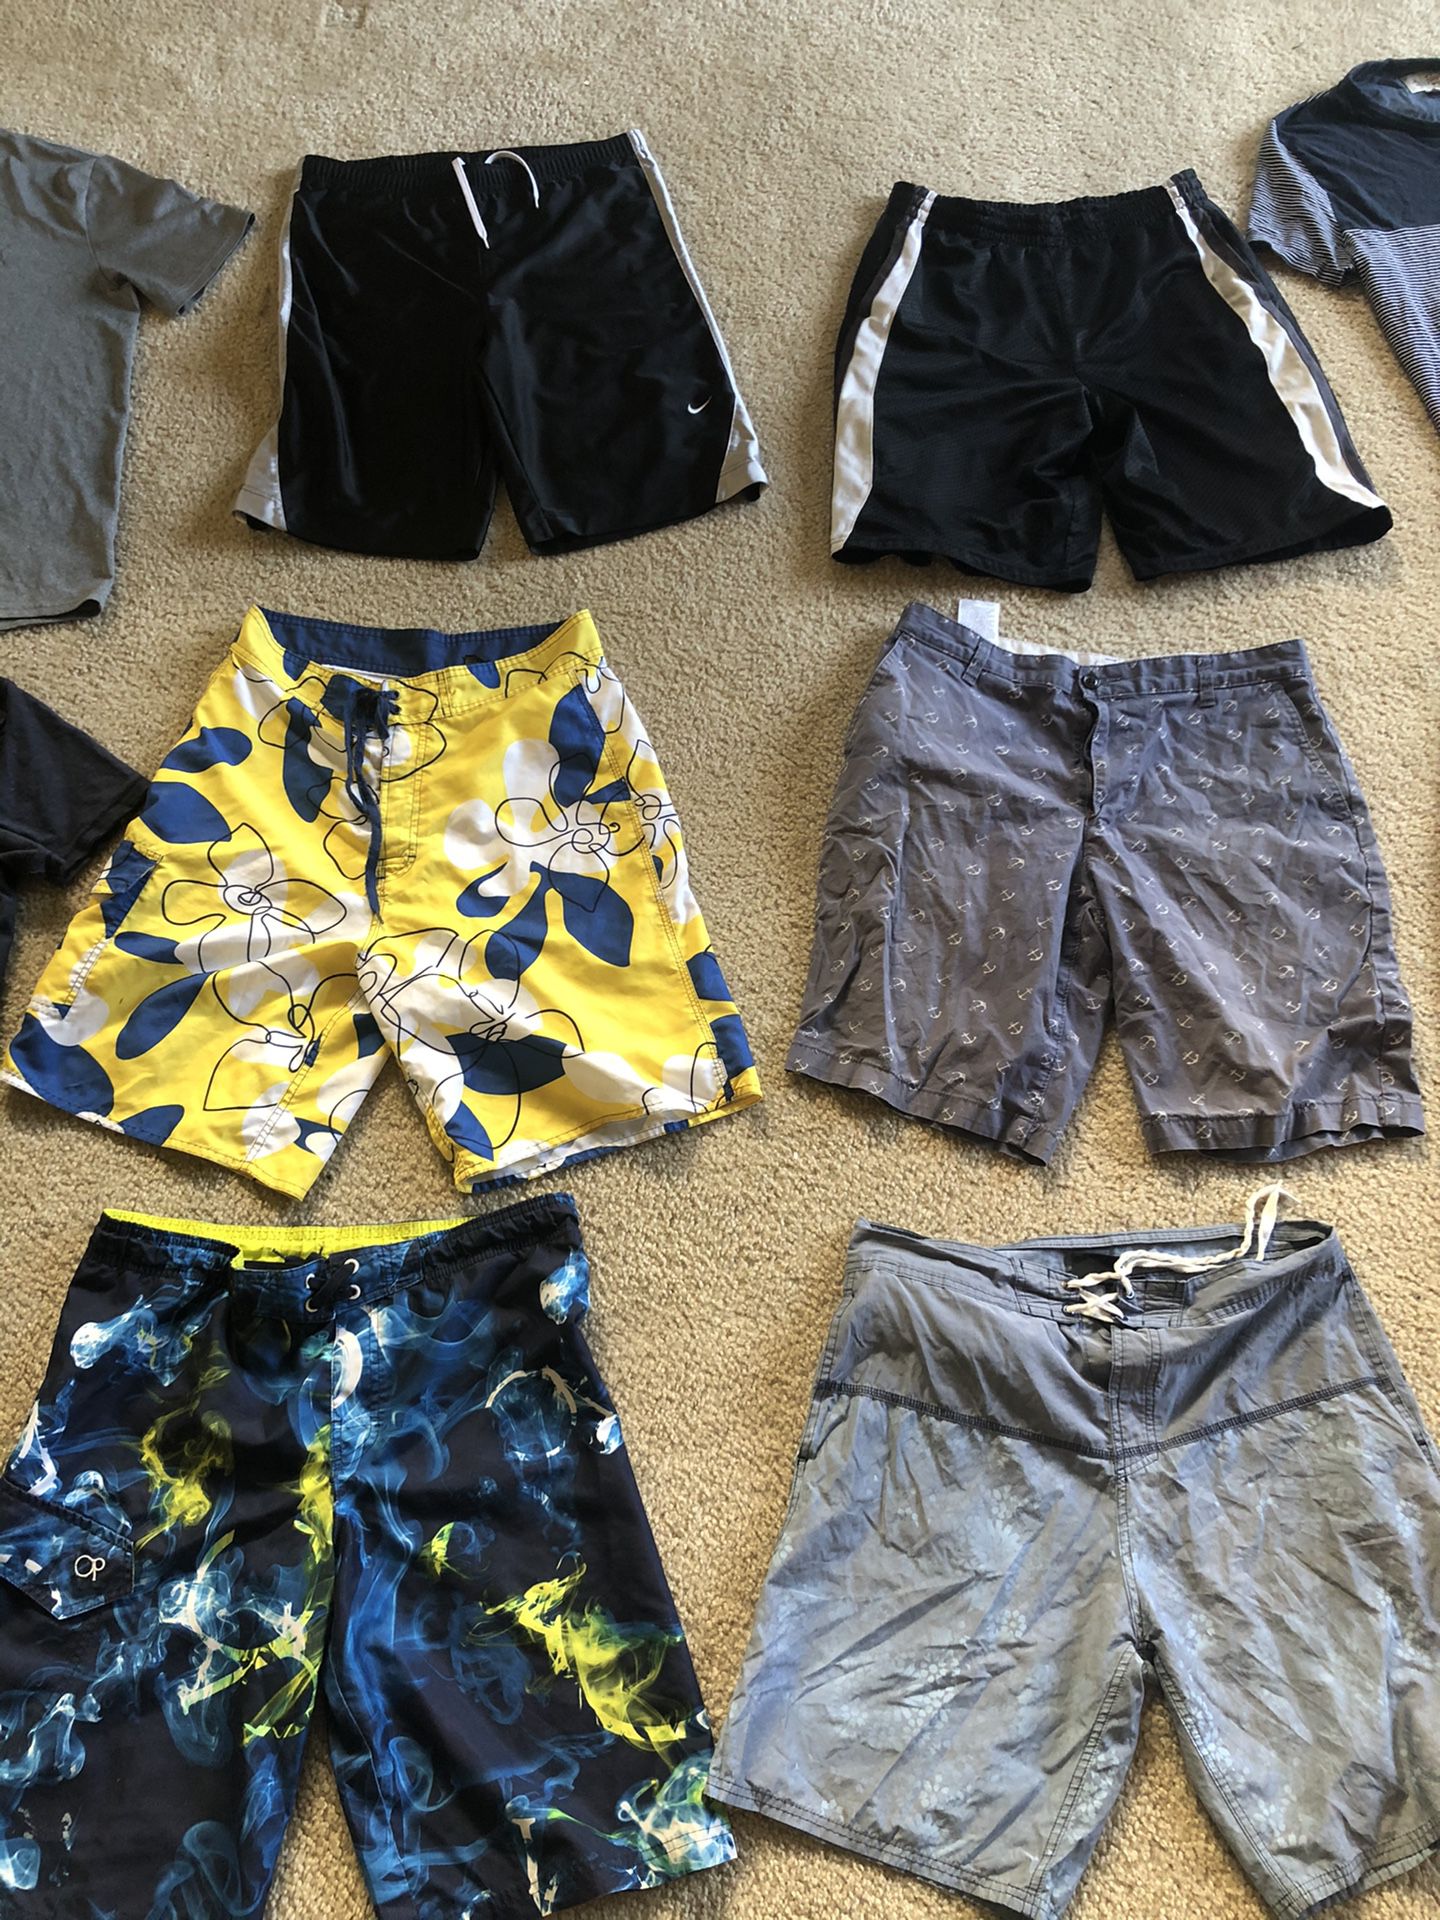 6 pairs of shorts waist about 28-30